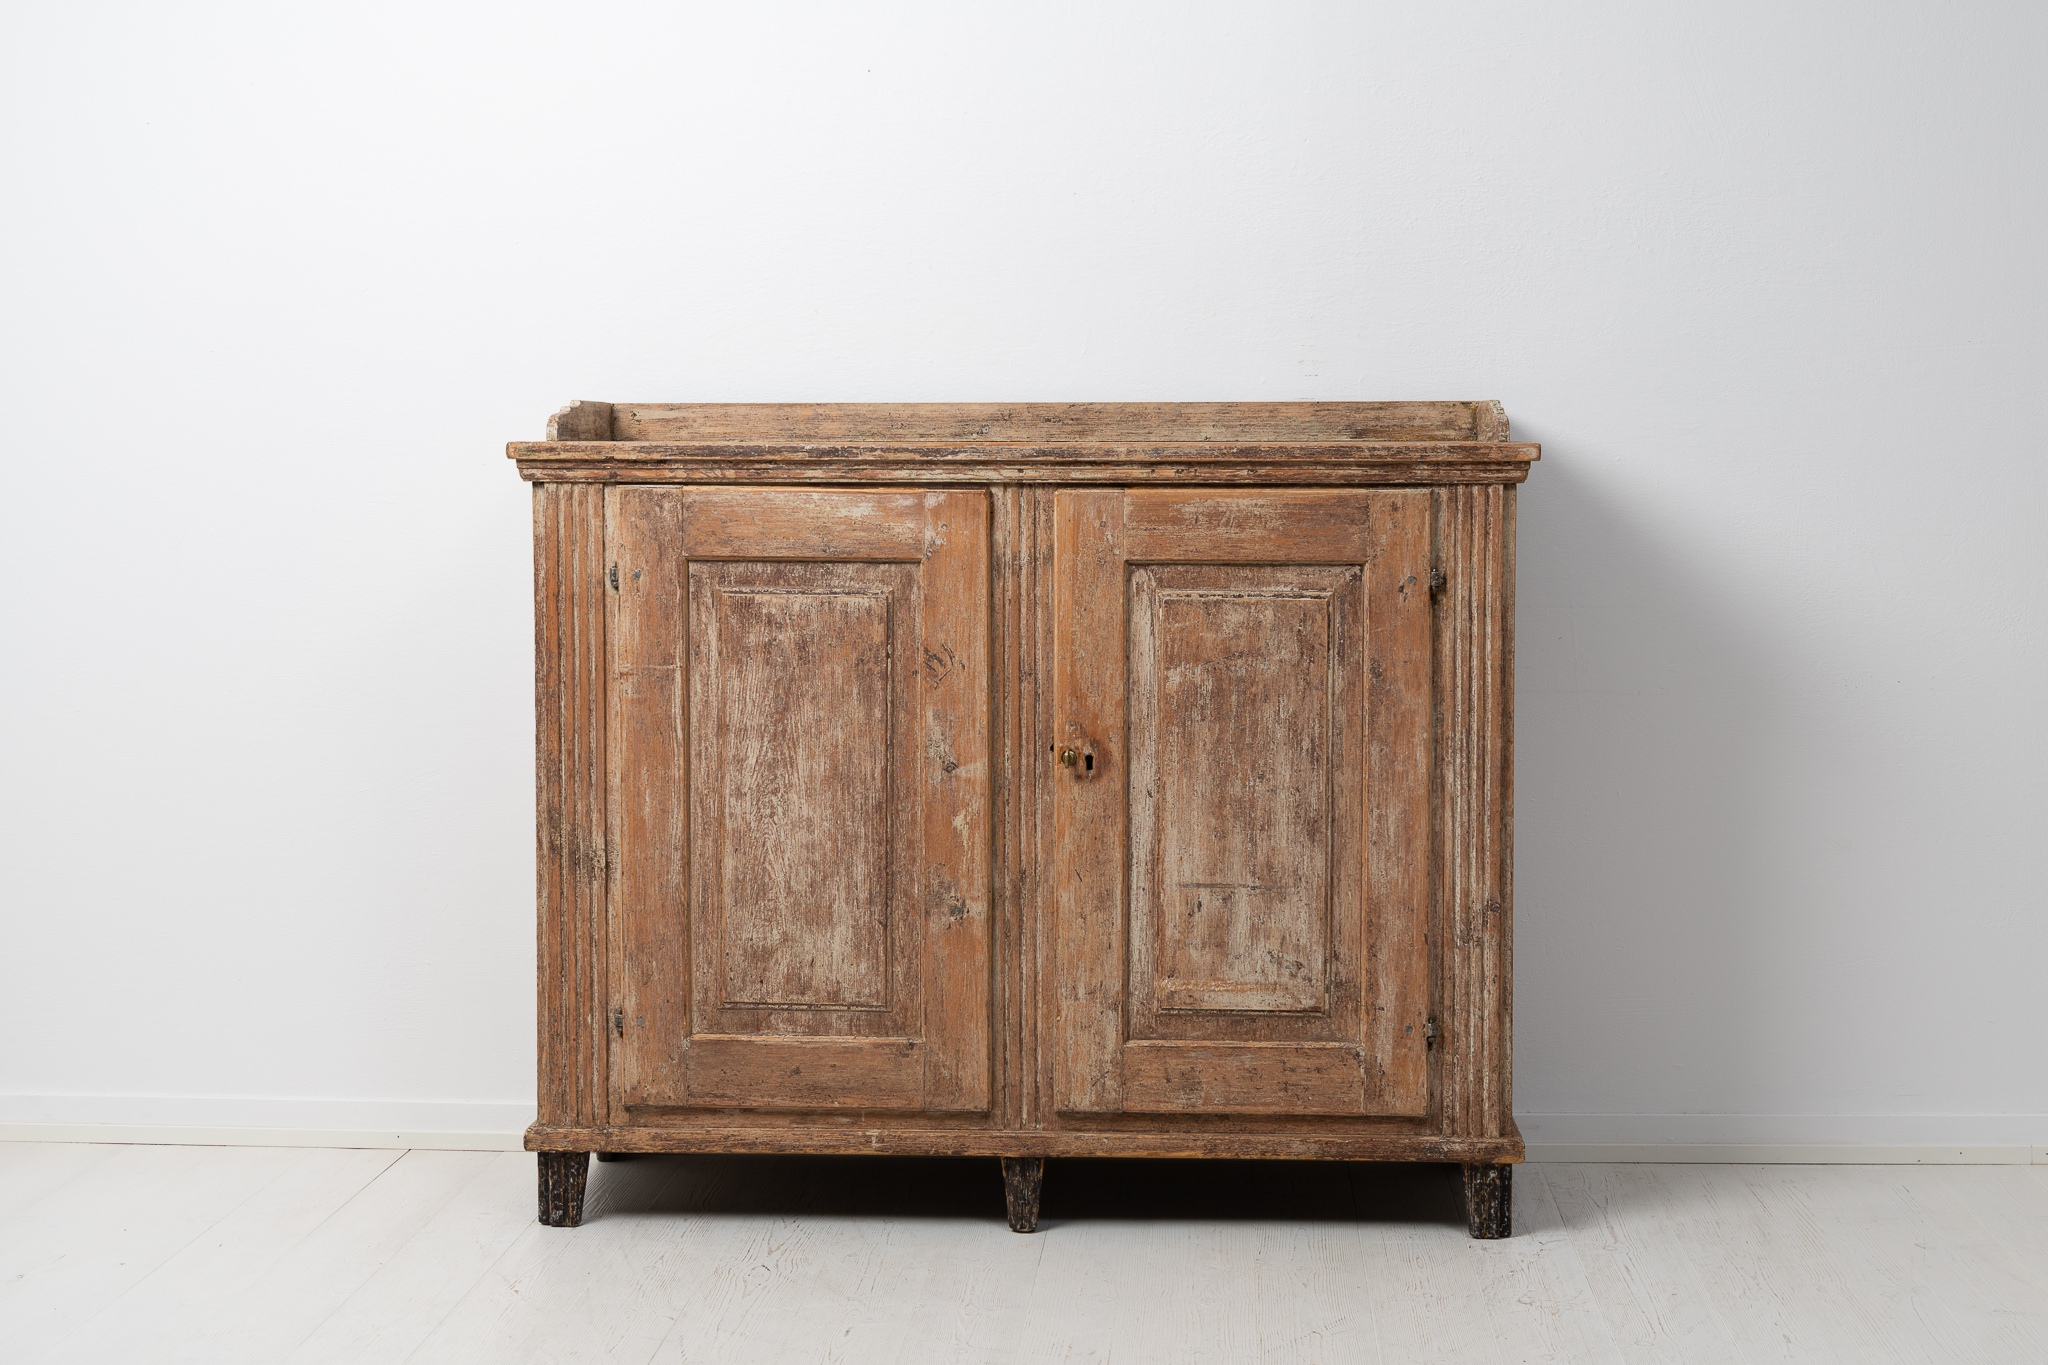 Genuine Swedish antique sideboard in gustavian style made during the last years of the 18th century, 1790 to 1800. From Northern Sweden